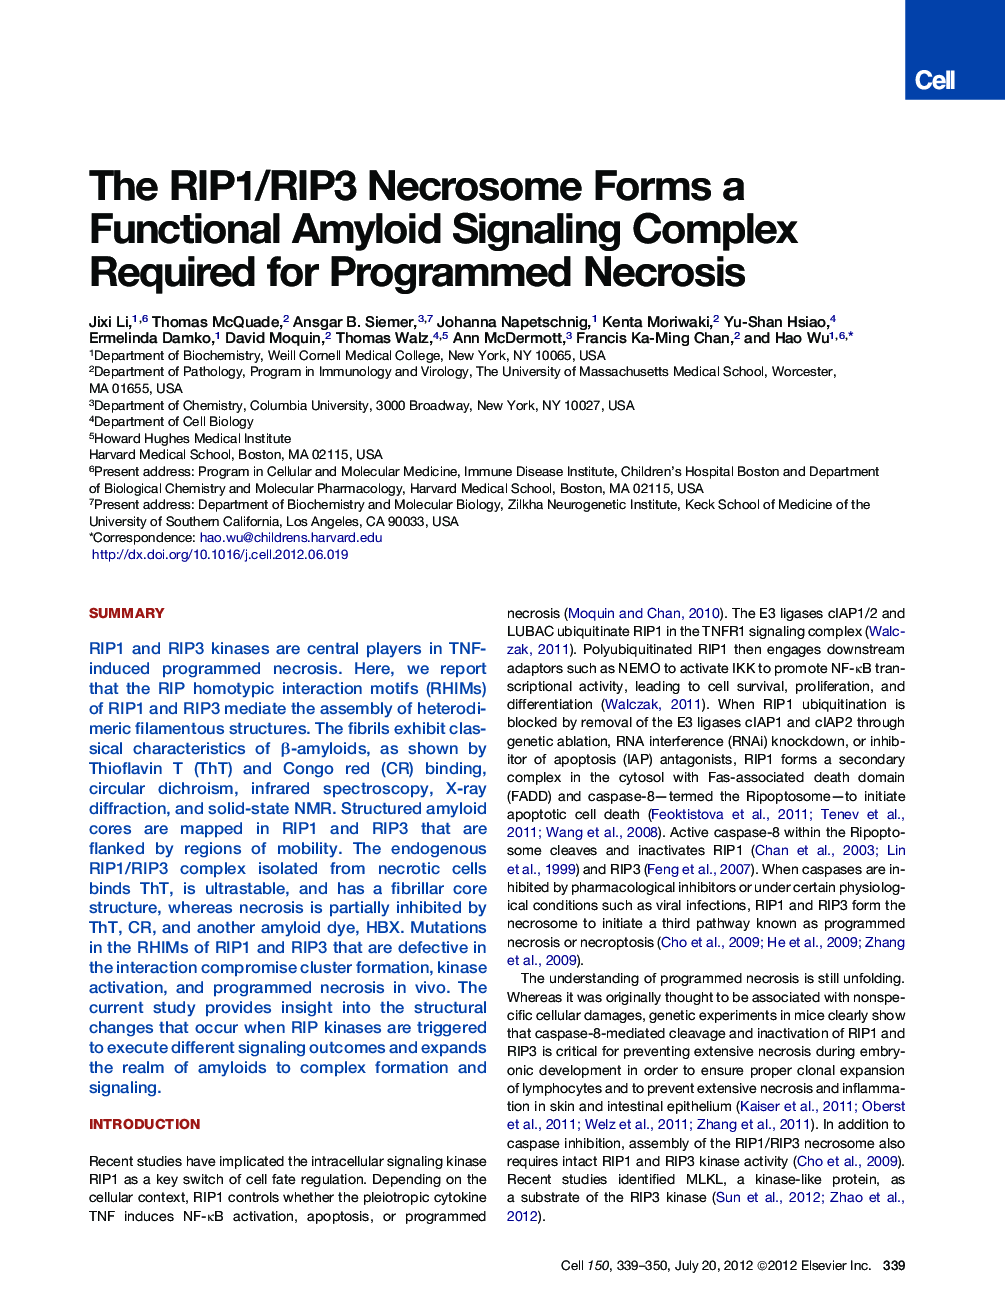 The RIP1/RIP3 Necrosome Forms a Functional Amyloid Signaling Complex Required for Programmed Necrosis